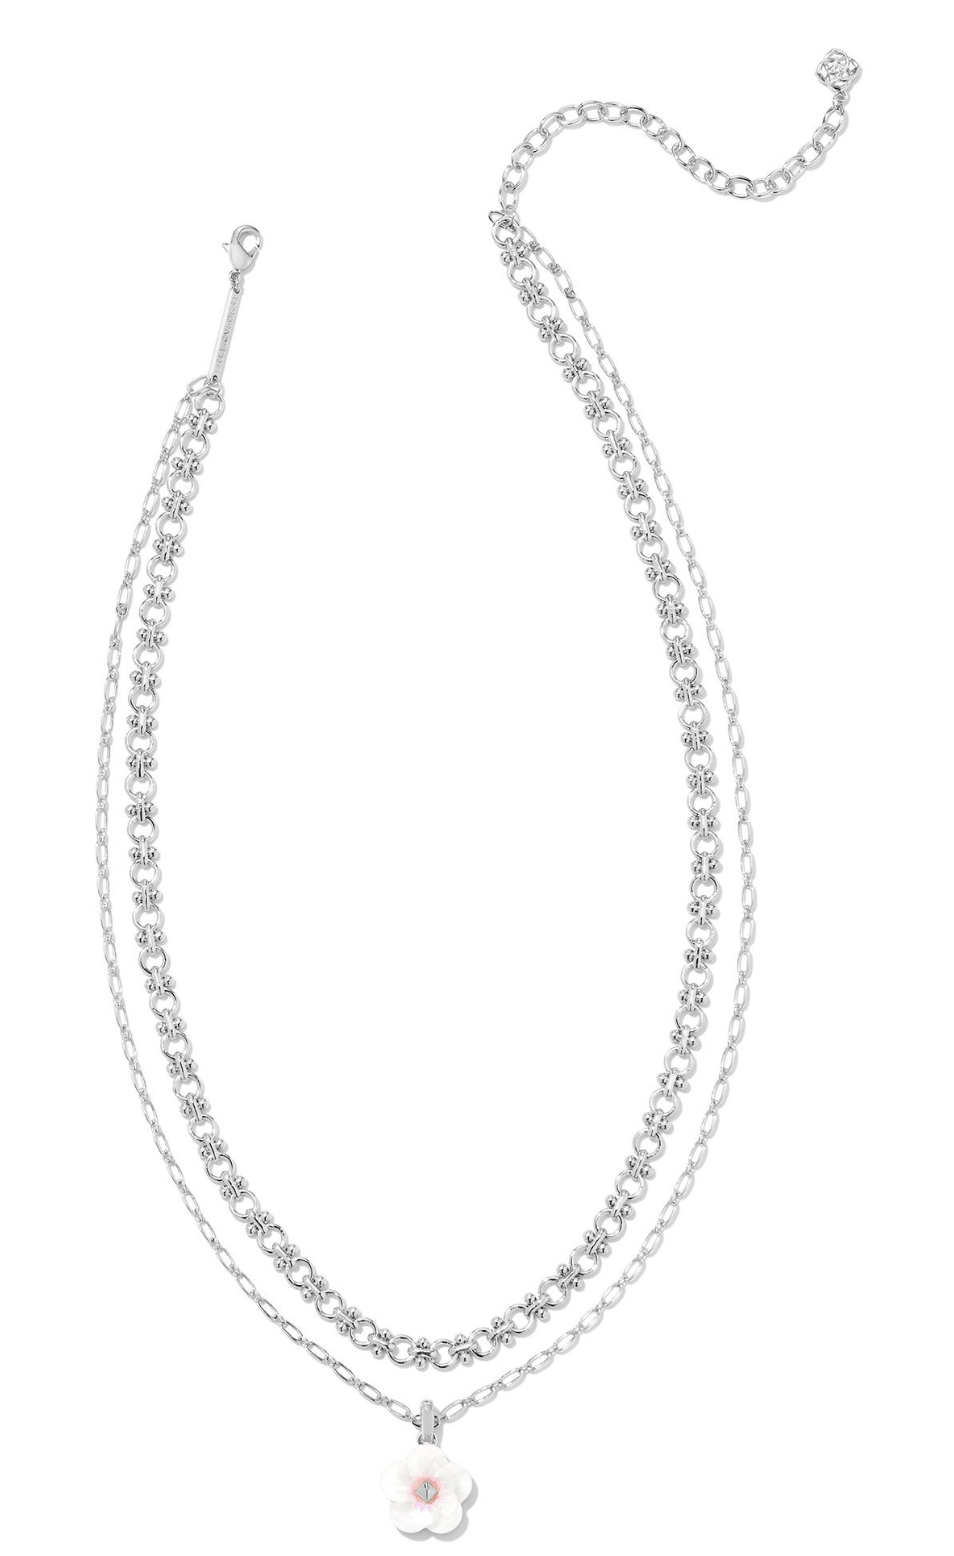 Deliah Silver Multi Strand Necklace in Iridescent Pink White Mix | KENDRA SCOTT - The Street Boutique 